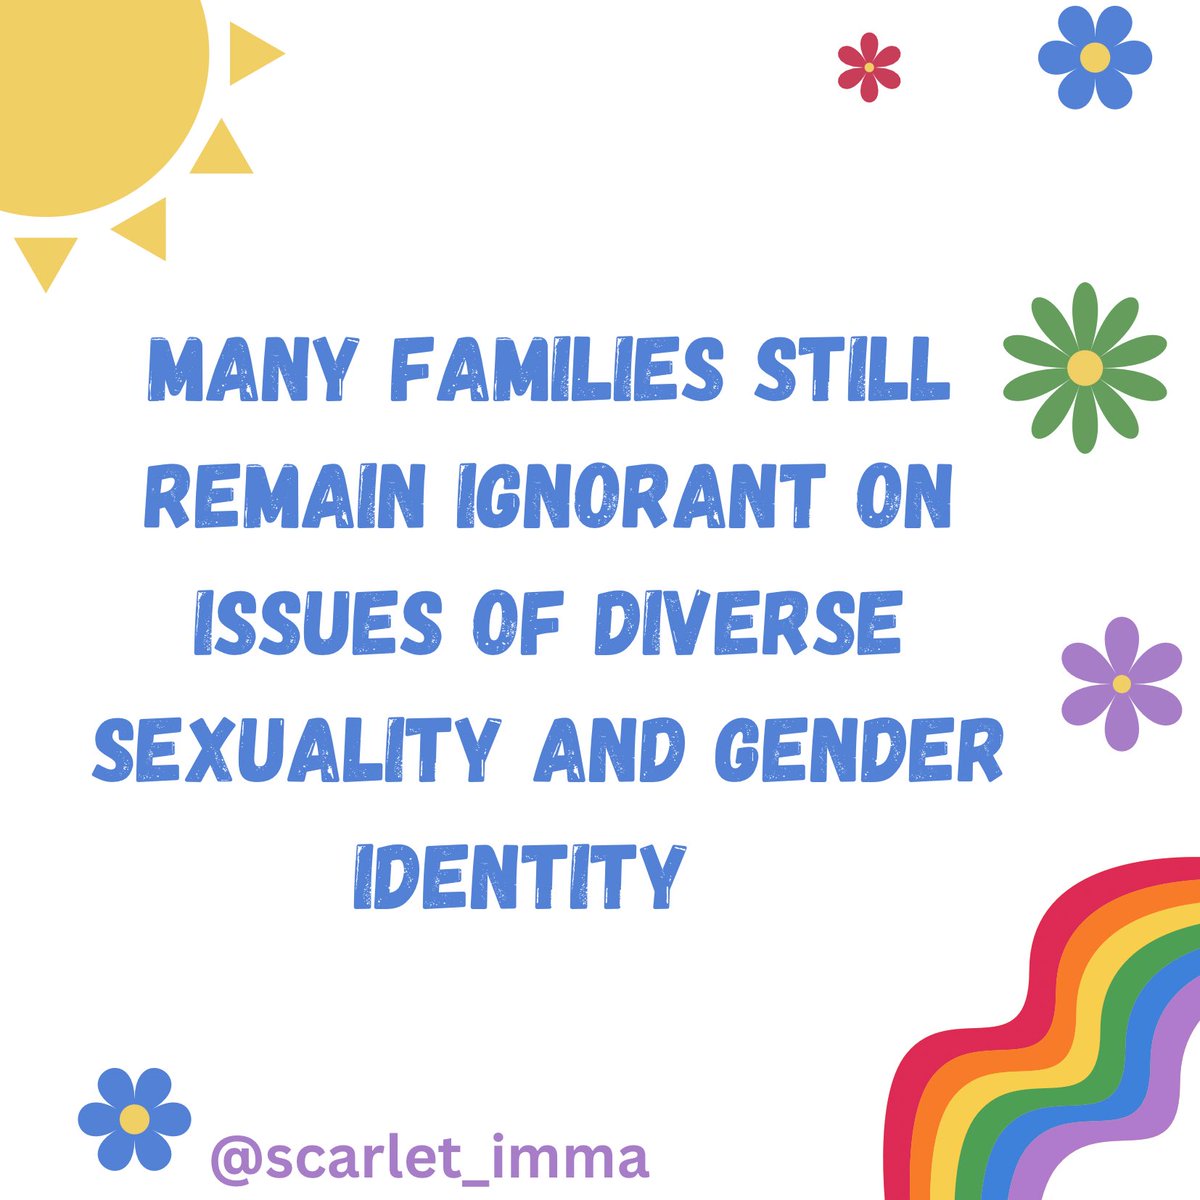 Family is the basic fundamental social unit in Kenya.However it has been the greatest source of discomfort to most LGBTQ persons who insist on being their true selves.
#BreakTheCycleOfViolence
#JusticeForEdwinChiloba
#JusticeForJoashMosoti
#JusticeForEricaChandra